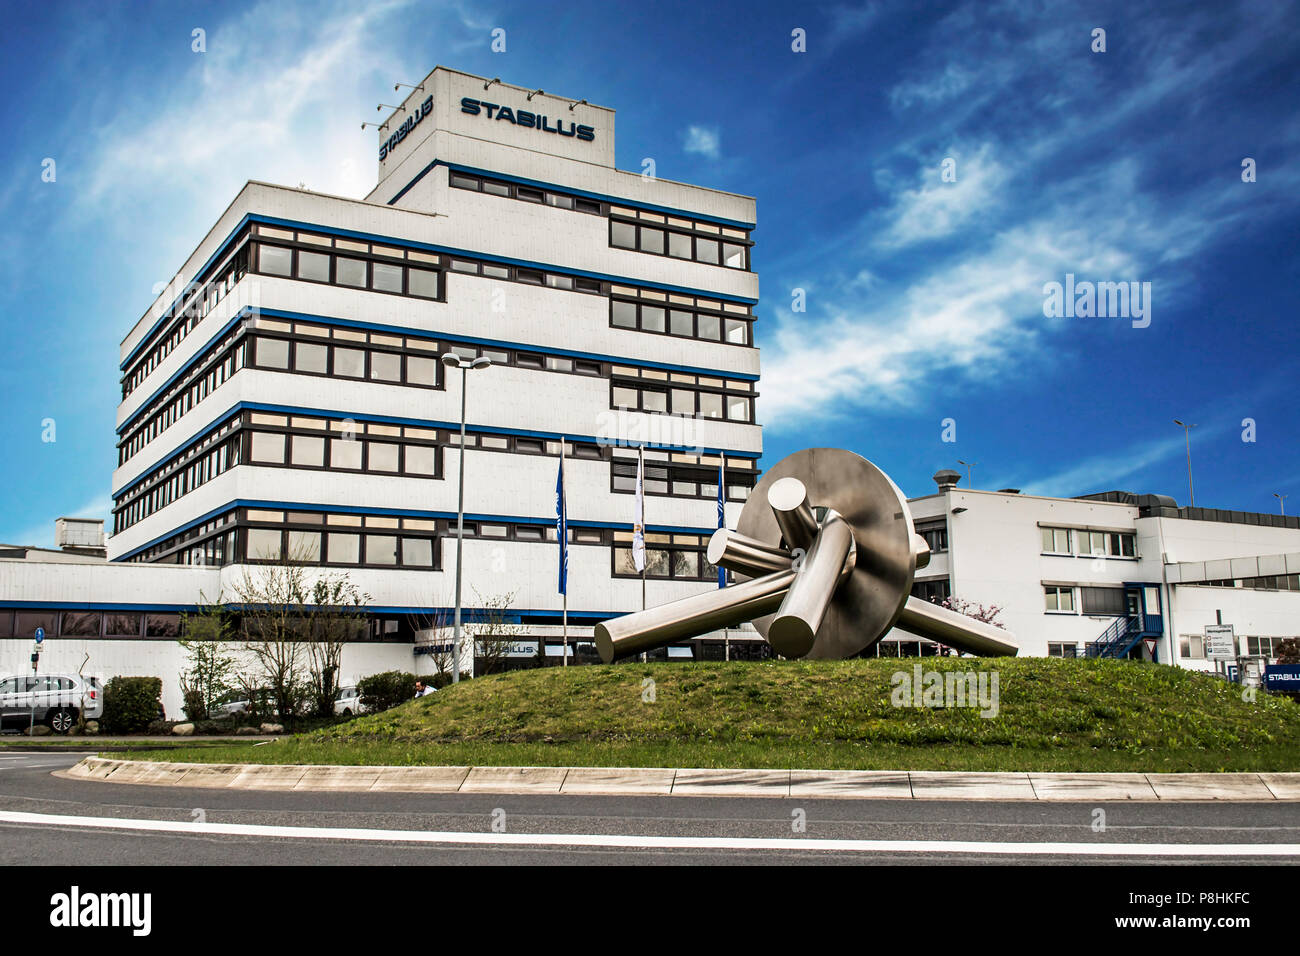 Koblenz, Germany 09.07.2017: view of the Stabilus headquarter and factory in Koblenz. You can also see factory buildings Stock Photo